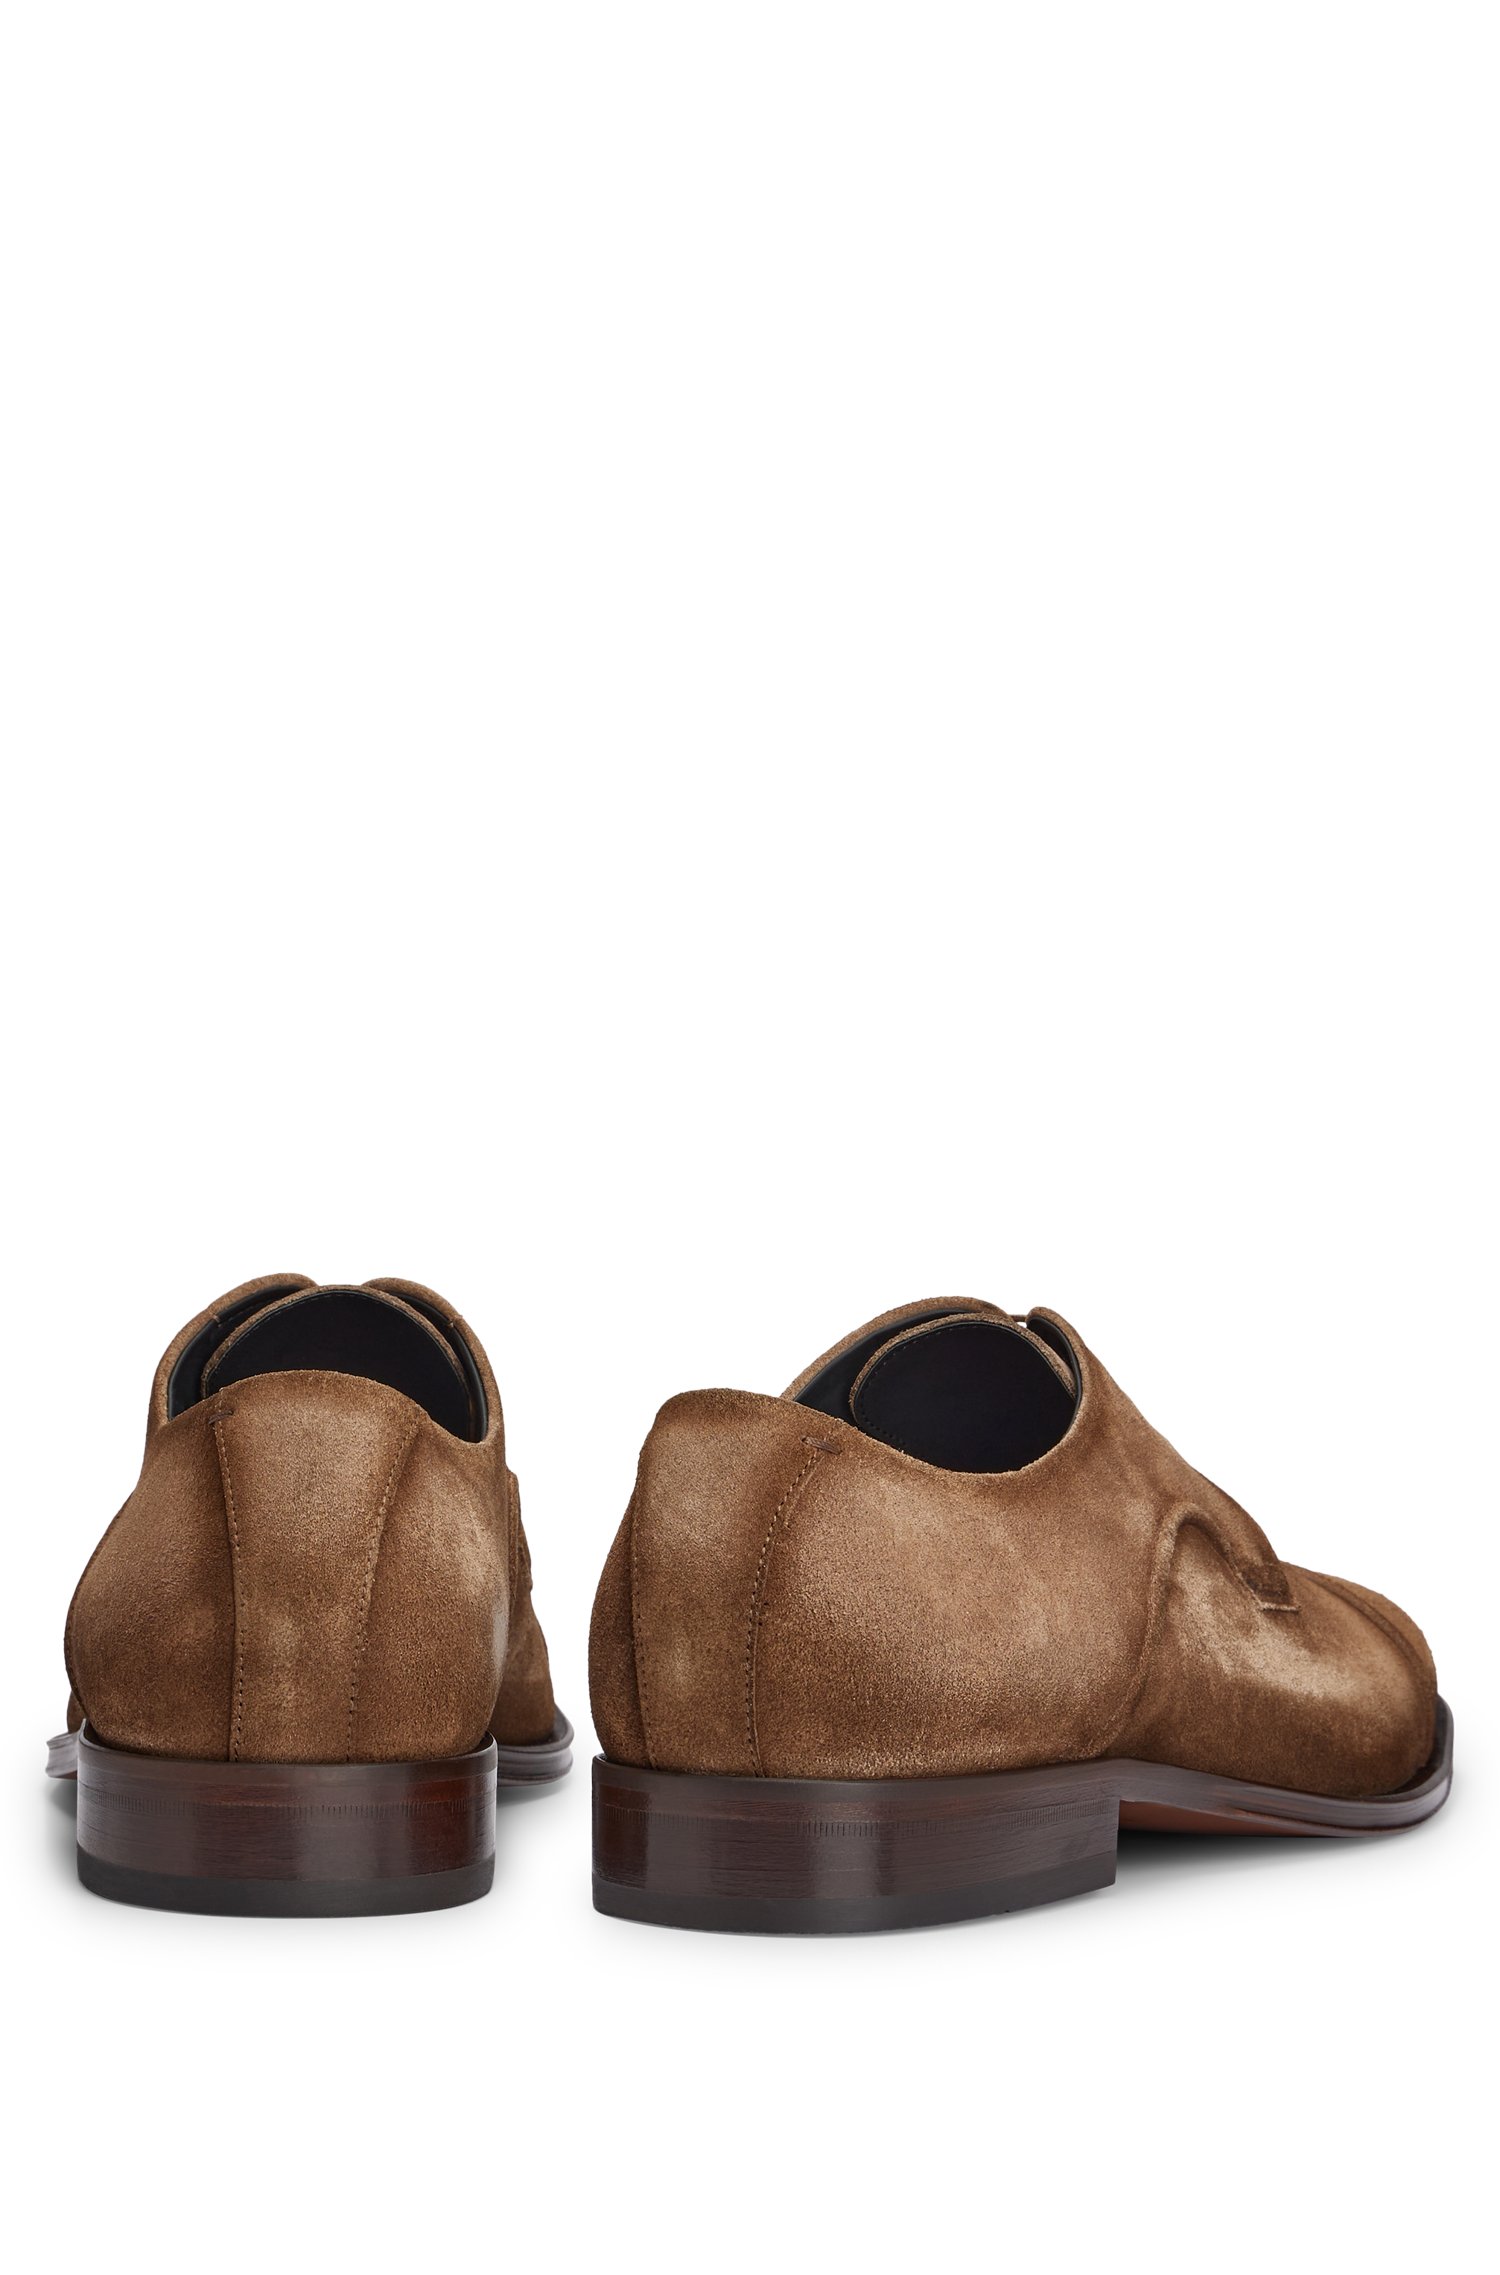 Italian-made suede Derby shoes with cap-toe detail